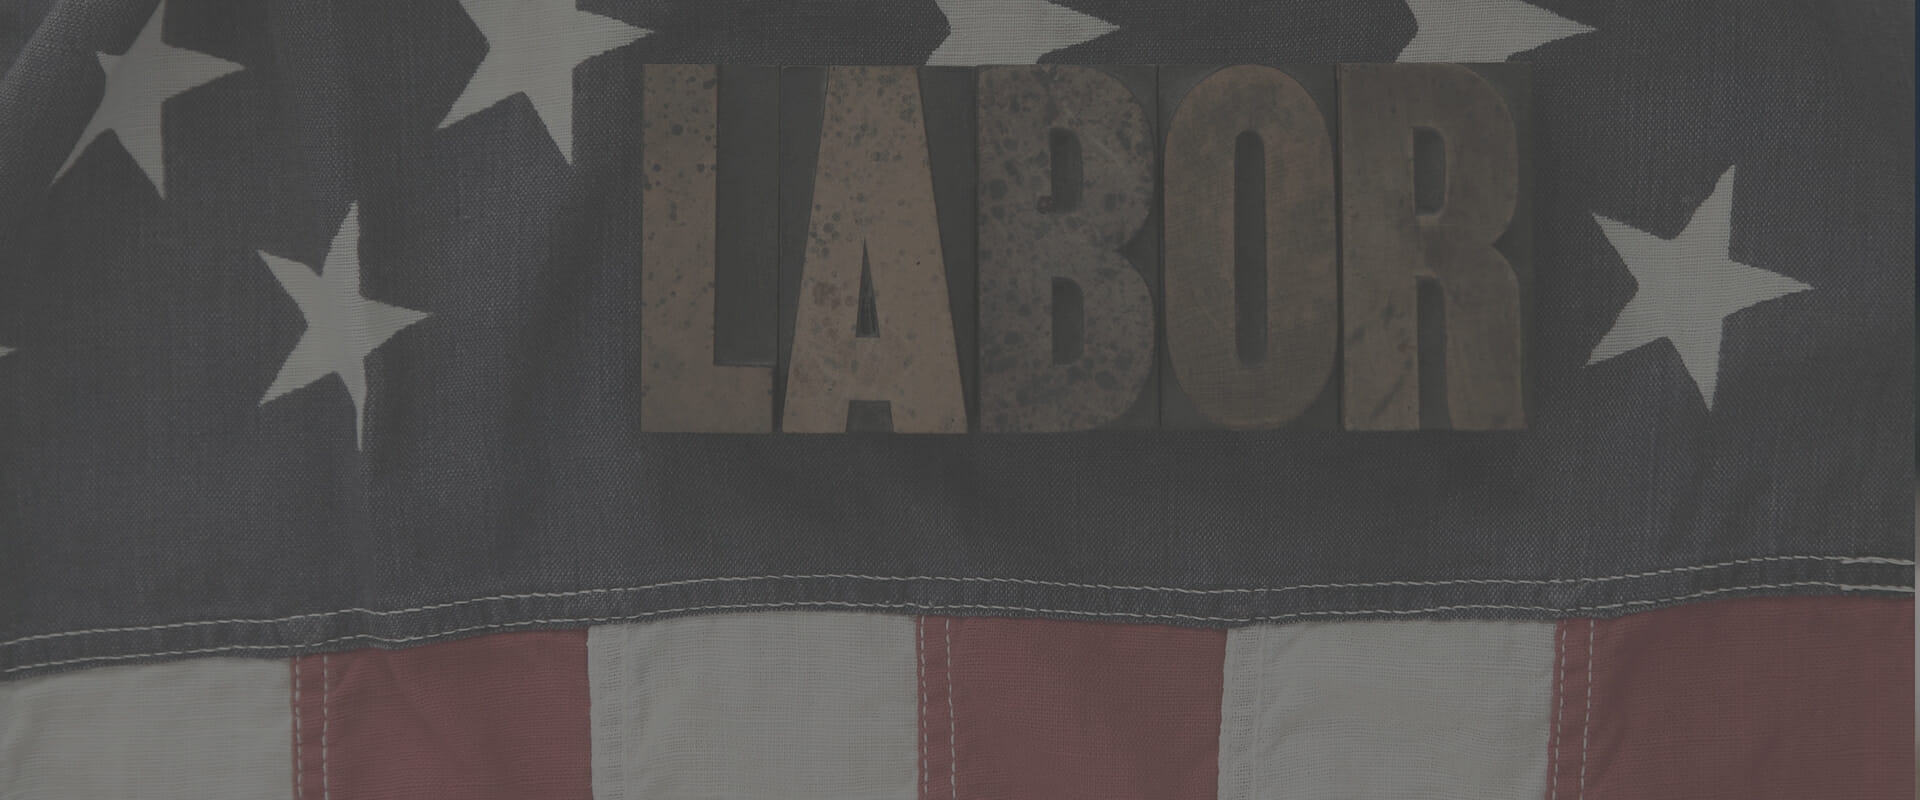 Traditional Labor/Union Relations